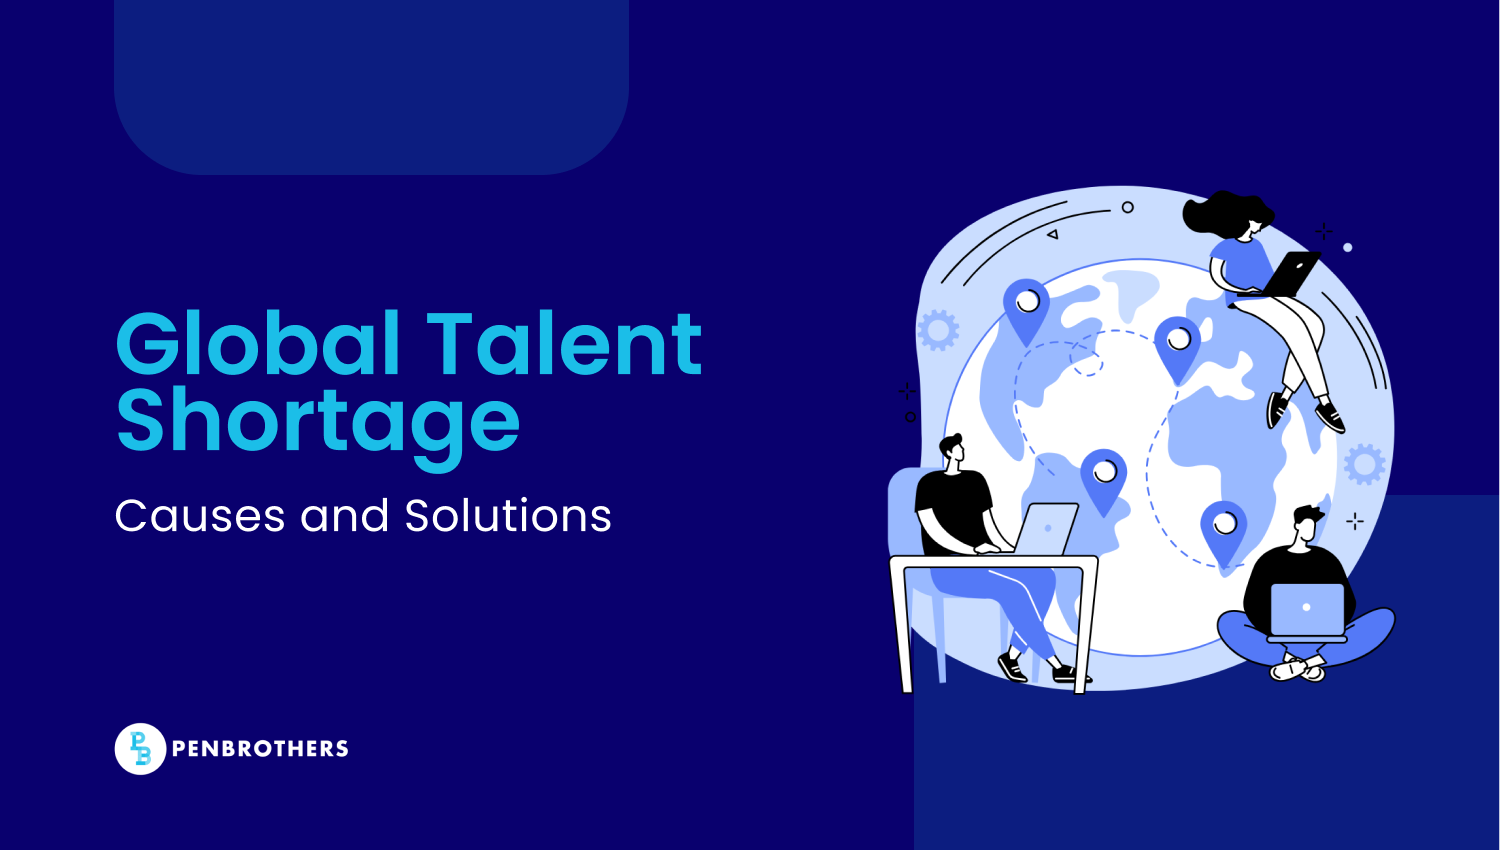 Global Talent Shortage: Understanding the Causes and Solutions